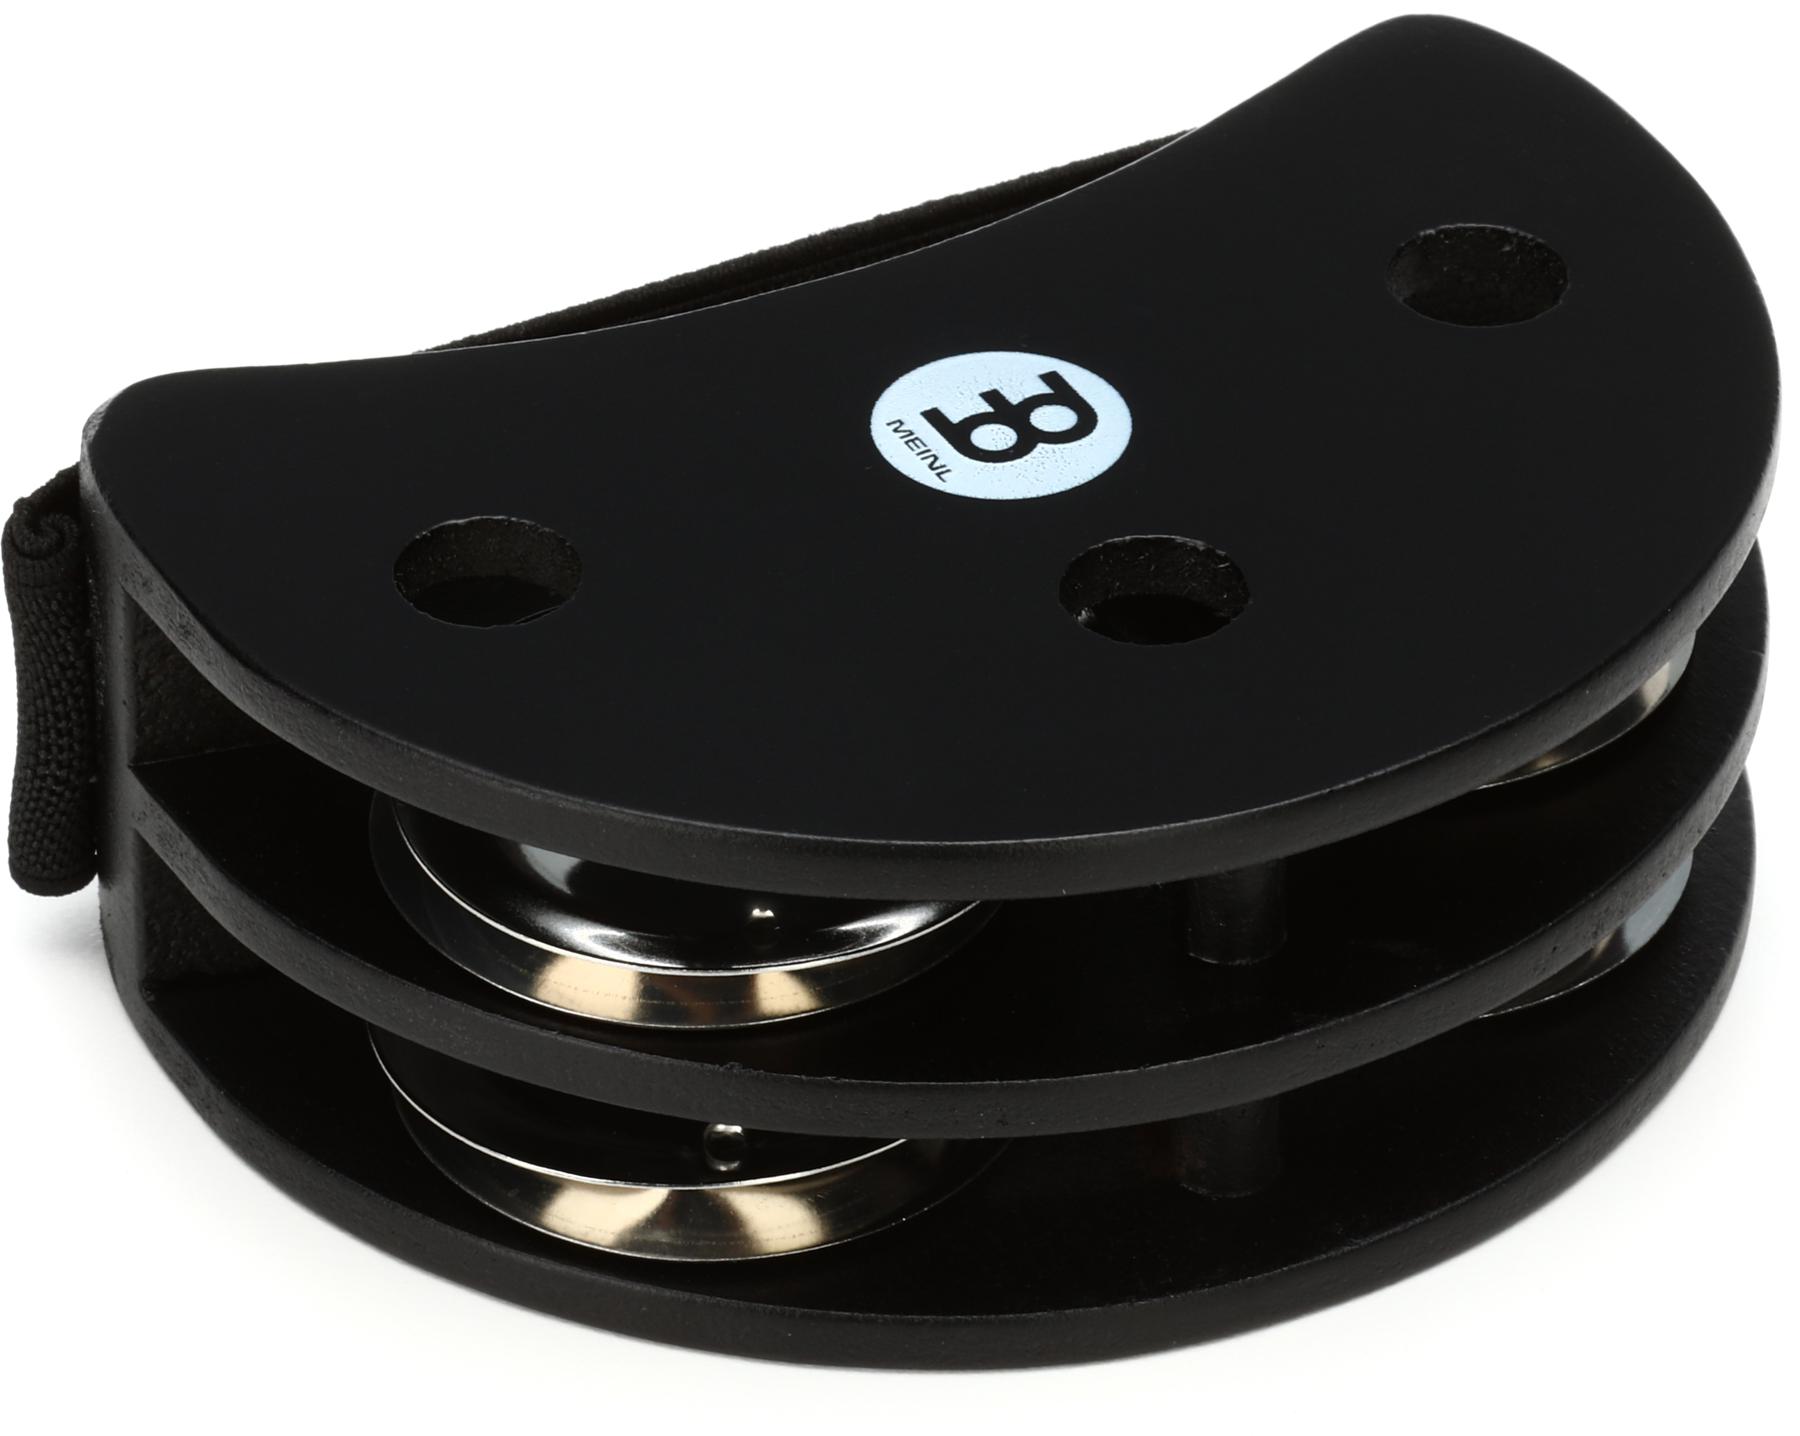 1. Meinl Foot Tambourine with Stainless Steel Jingles